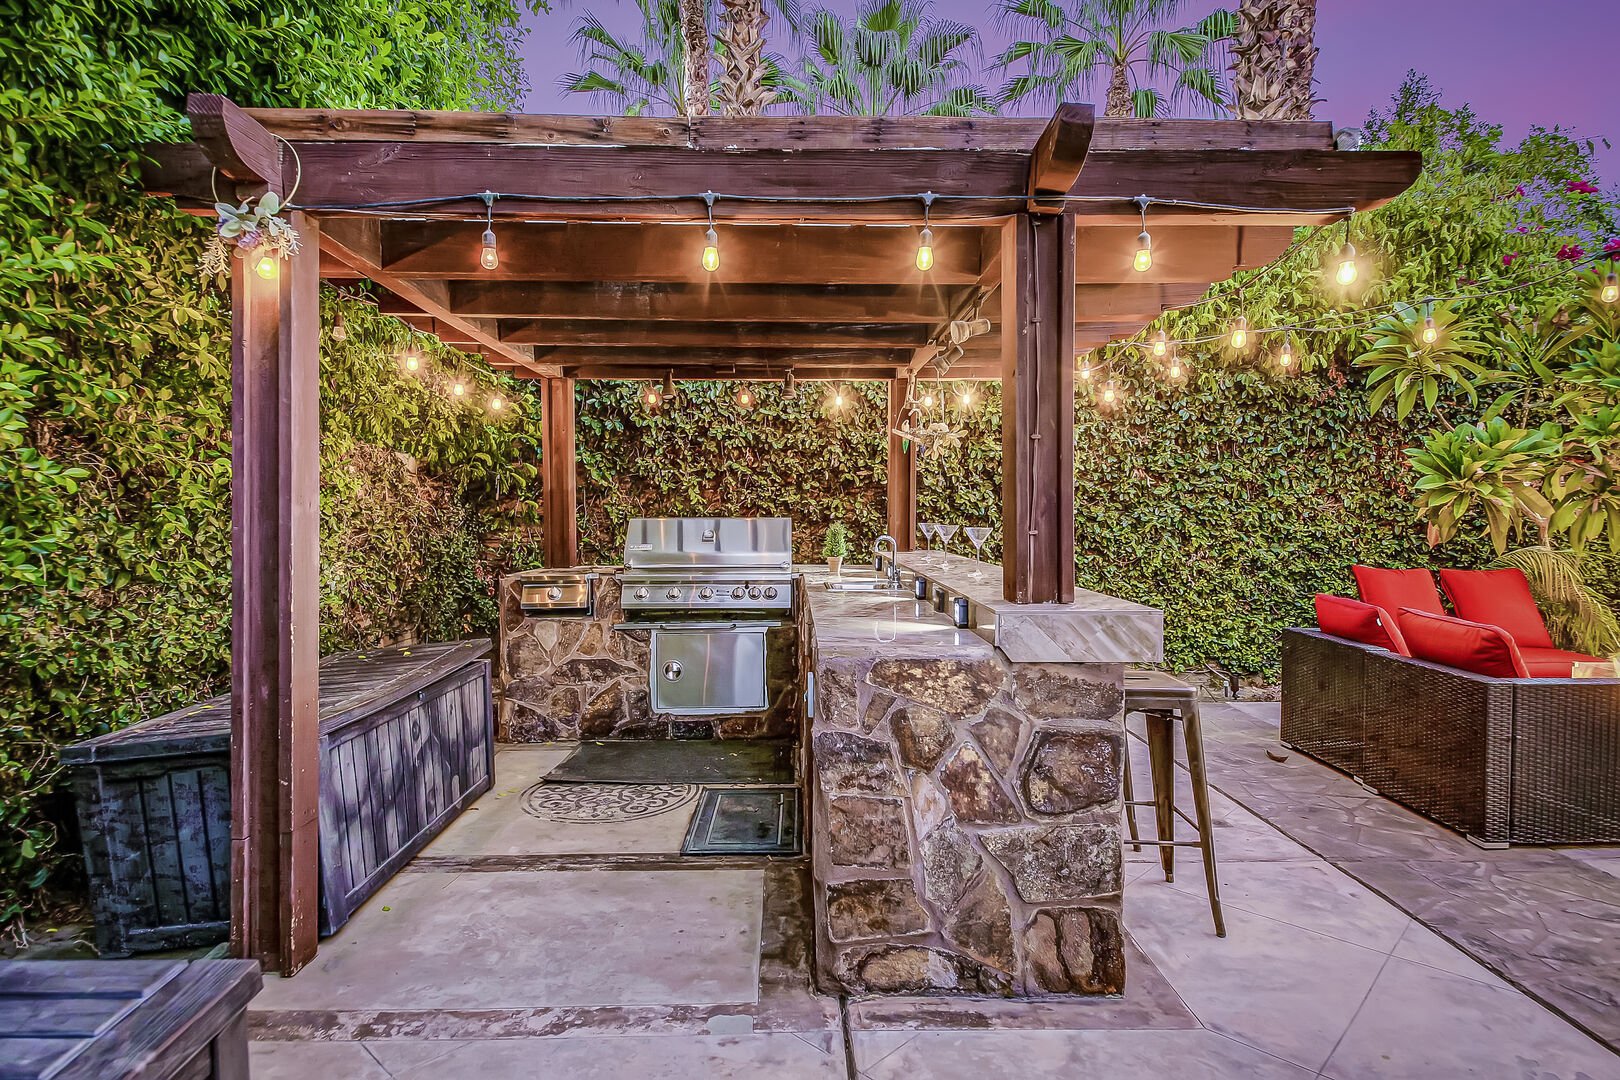 The covered outdoor kitchen with a built in barbecue is the best place to entertain.